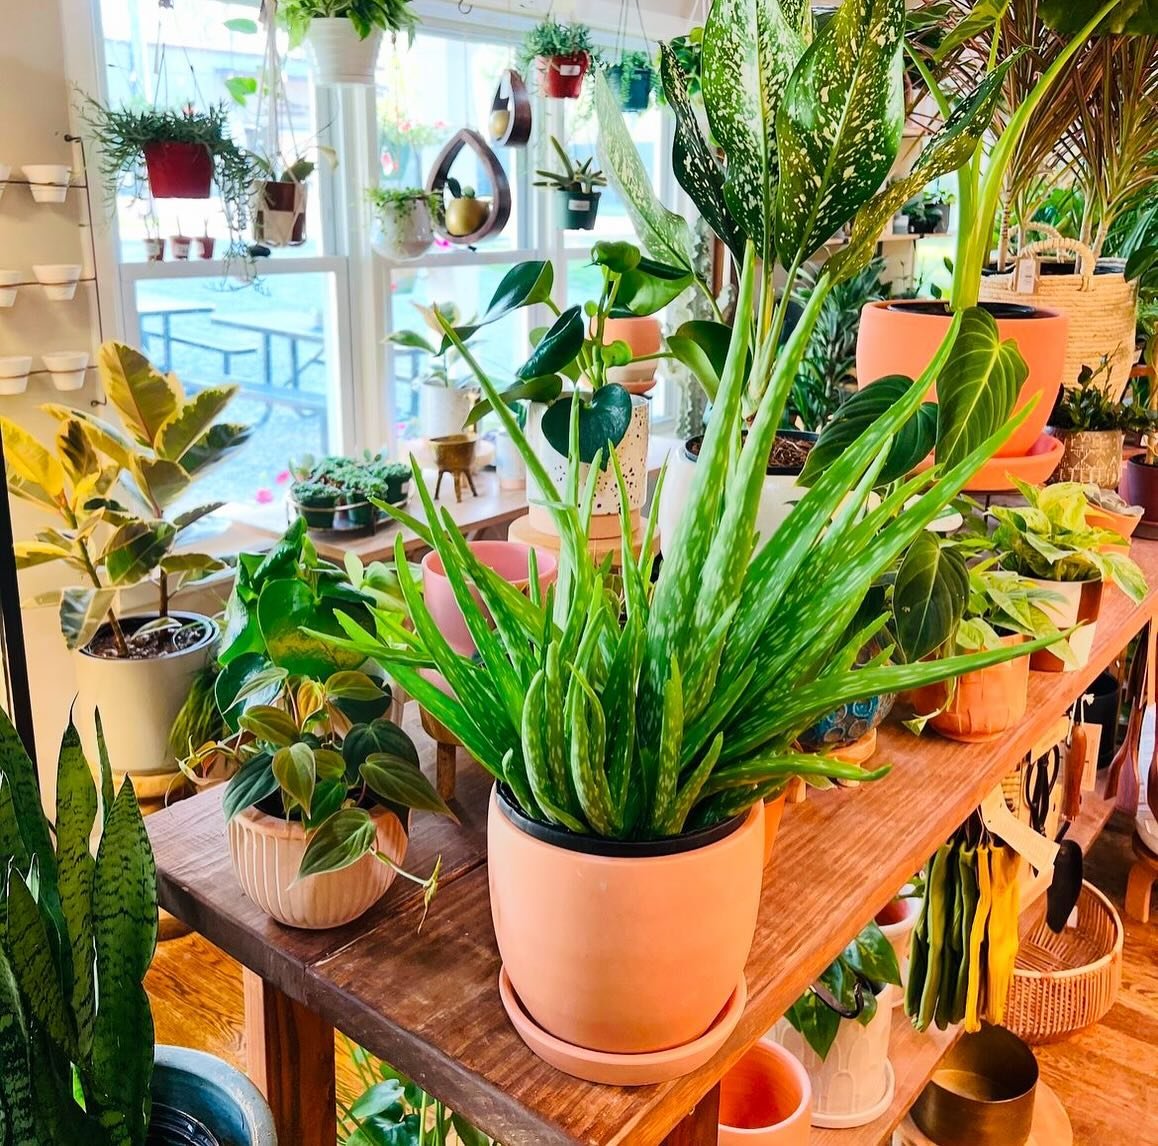 Antiques &amp; Garden Market Vendor Spotlight!

@hiddenseedco &mdash;  Hidden Seed Plant Shop in Spring Hill is a place to learn and celebrate the diversity of plants. They sell a wide variety of plants and offer workshops to educate customers on pro